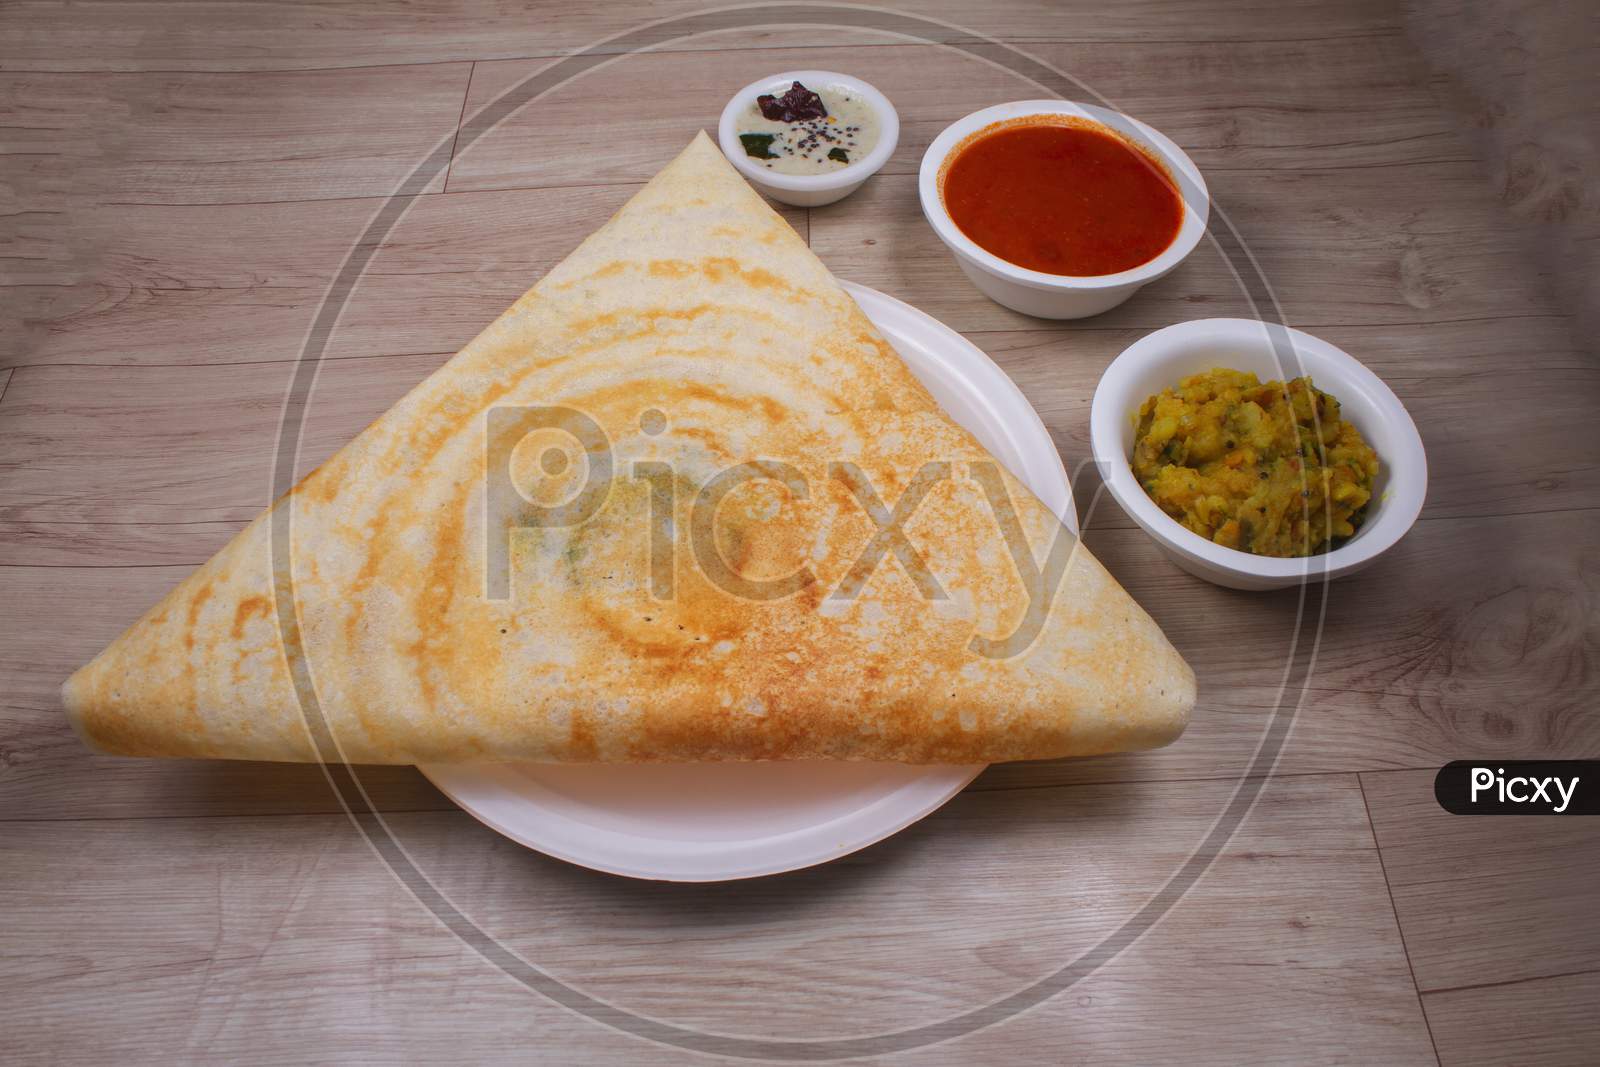 Masala Dosa Is A South Indian Dish That Is Served With Sambhar And Coconut Rubble. Selective Focus